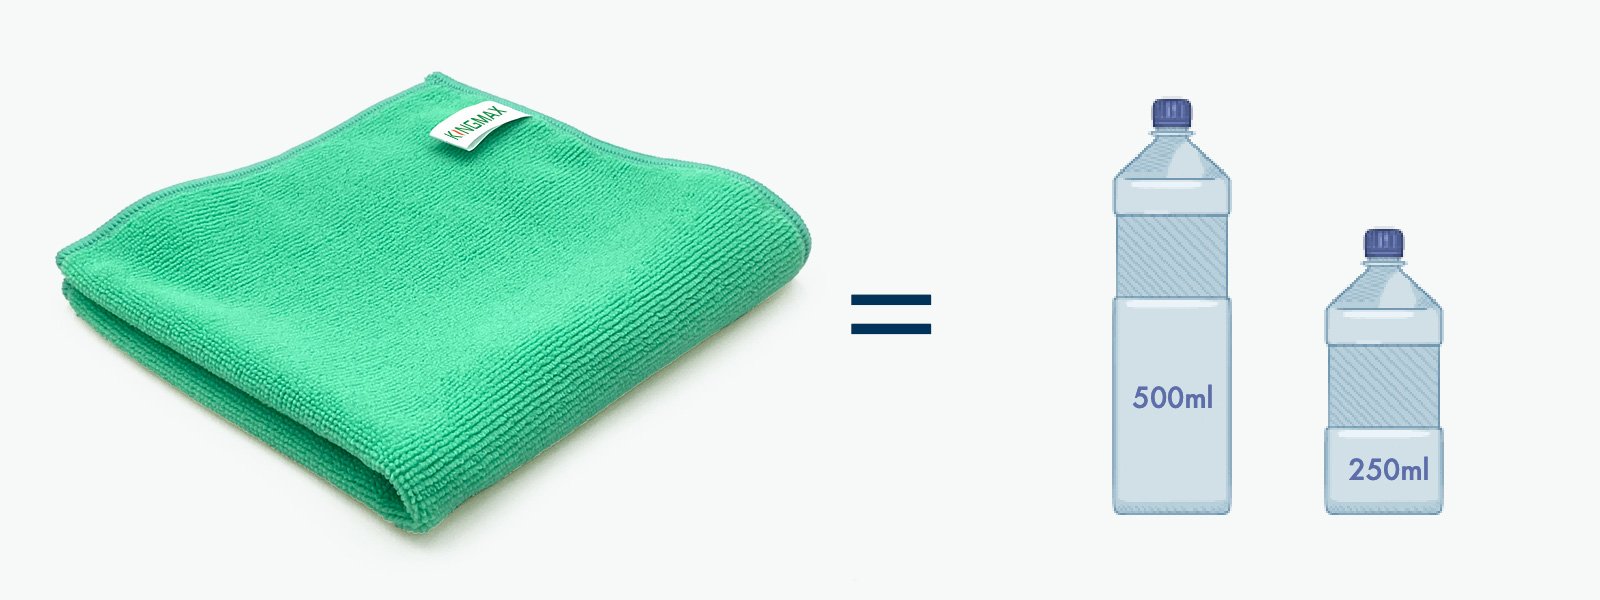 Through the eco-friendly manufacturing process of R-PET recycled microfiber cleaning products, we are proud to declare that 1 piece of KINGMAX rpet towel =1.5 PET beverage bottles